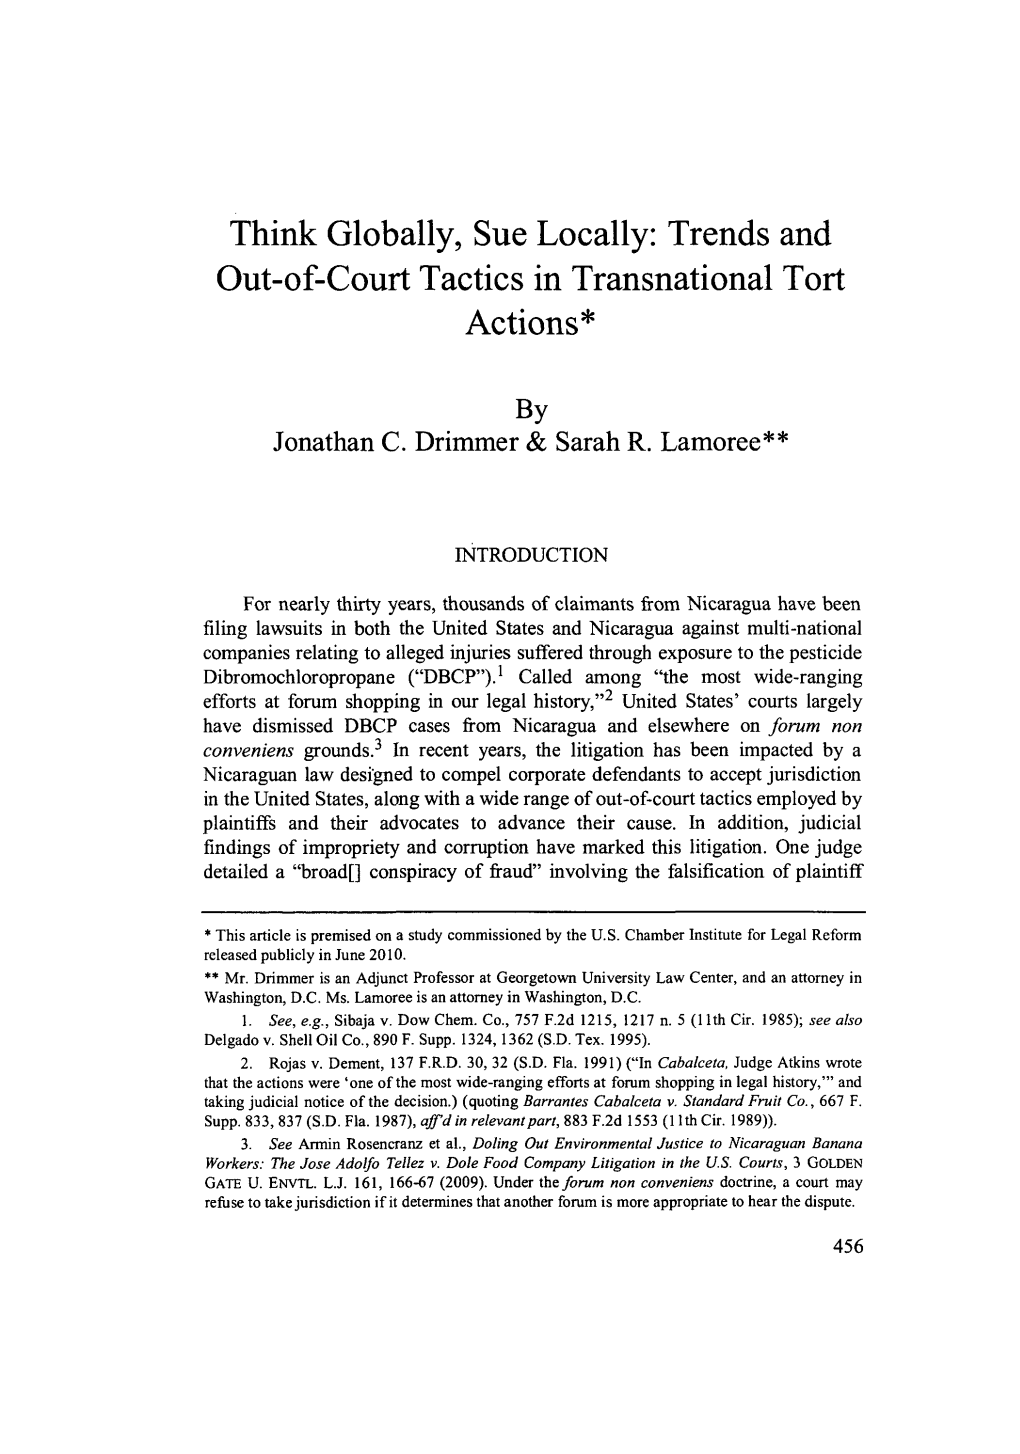 Trends and Out-Of-Court Tactics in Transitional Tort Actions